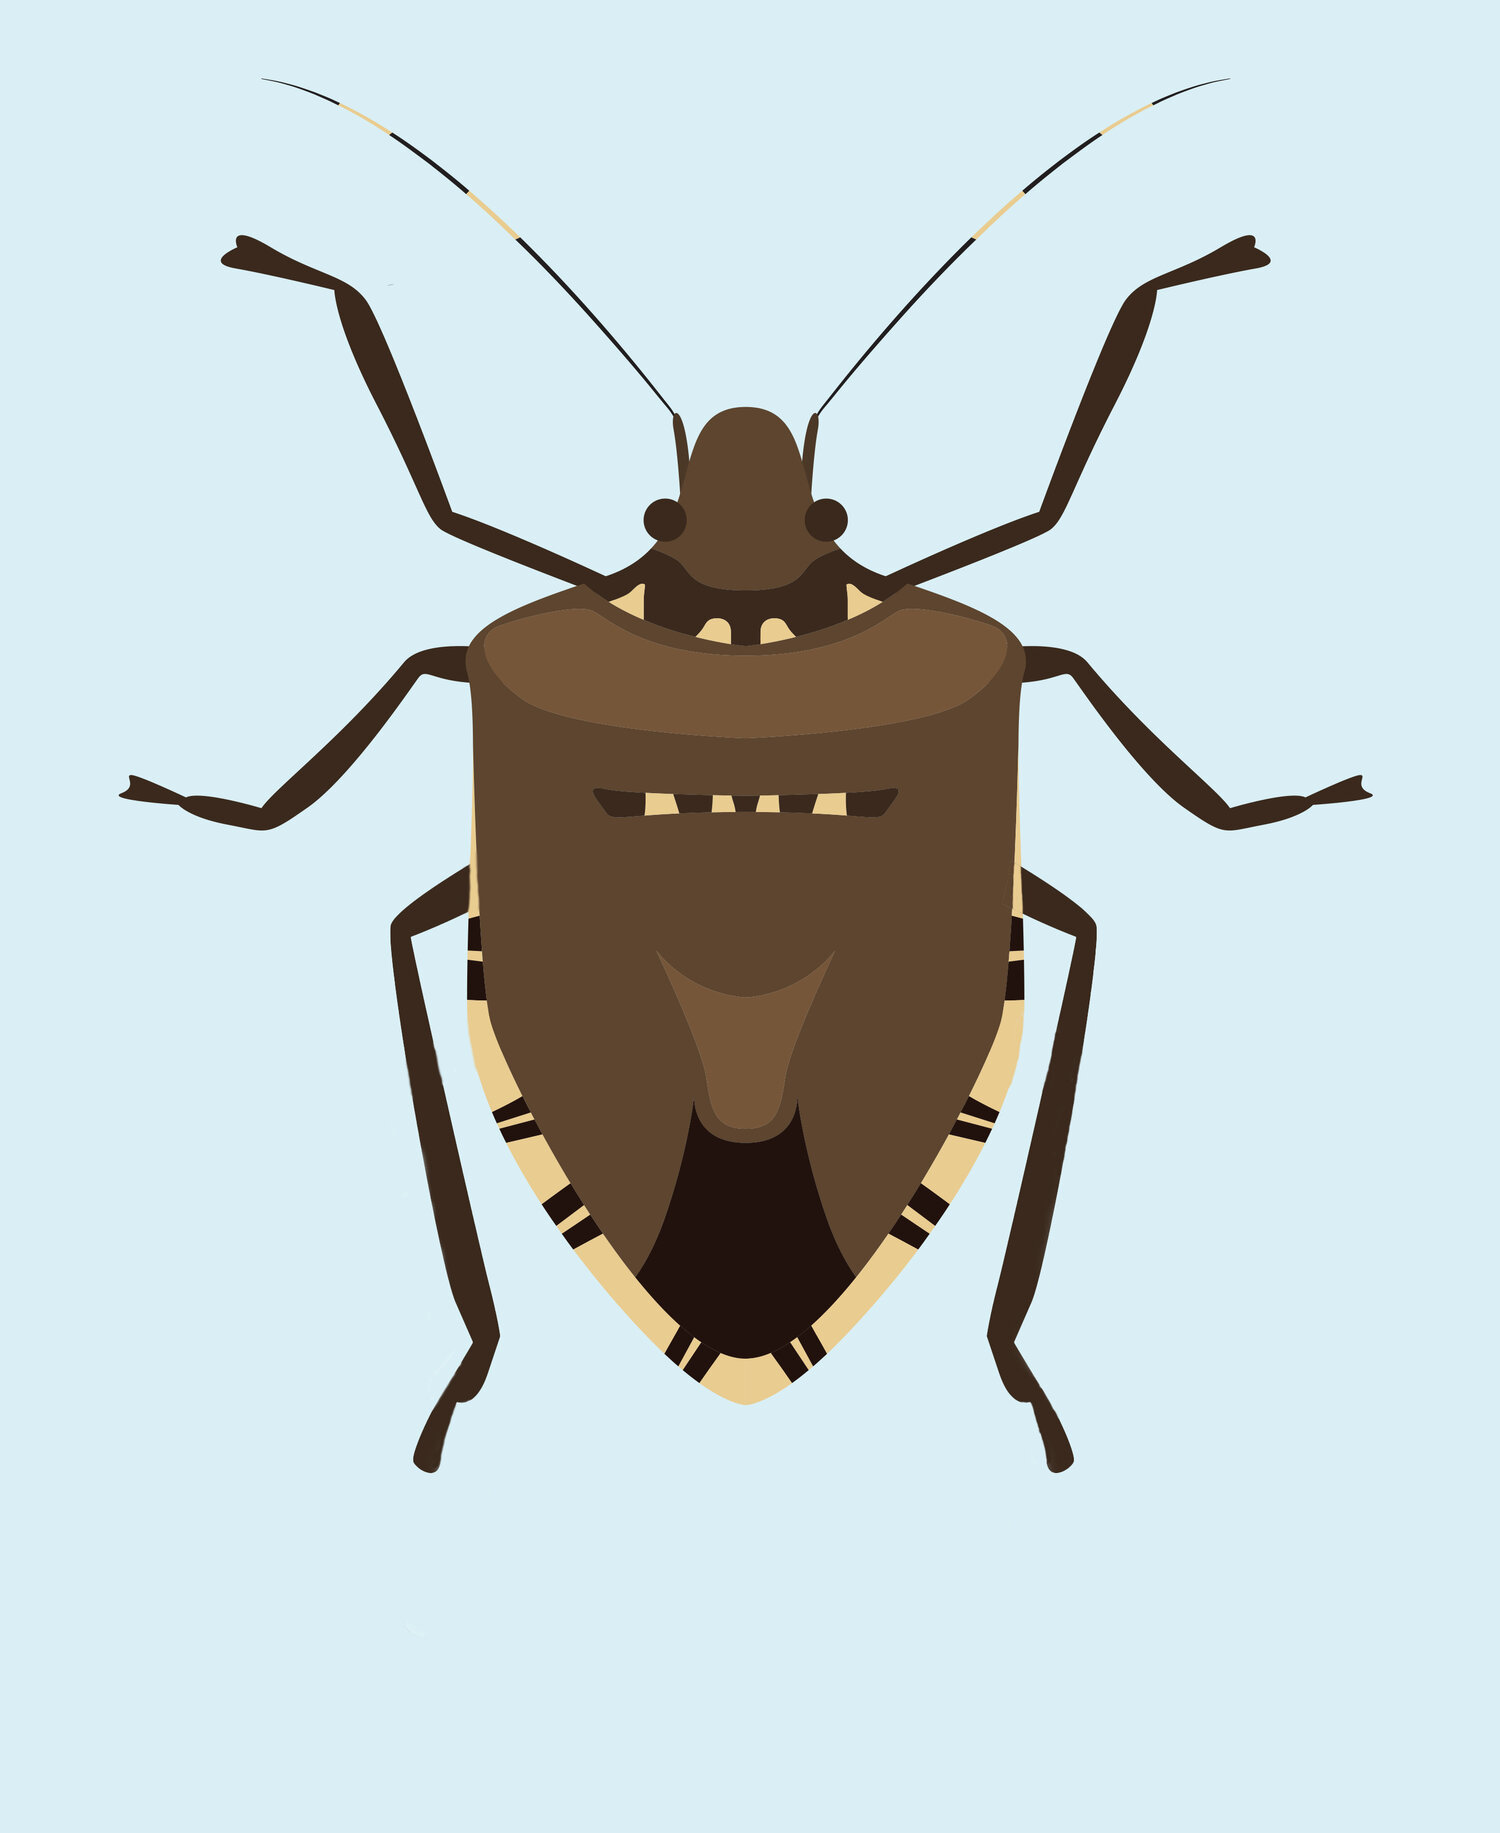 The Great Stink Bug Challenge